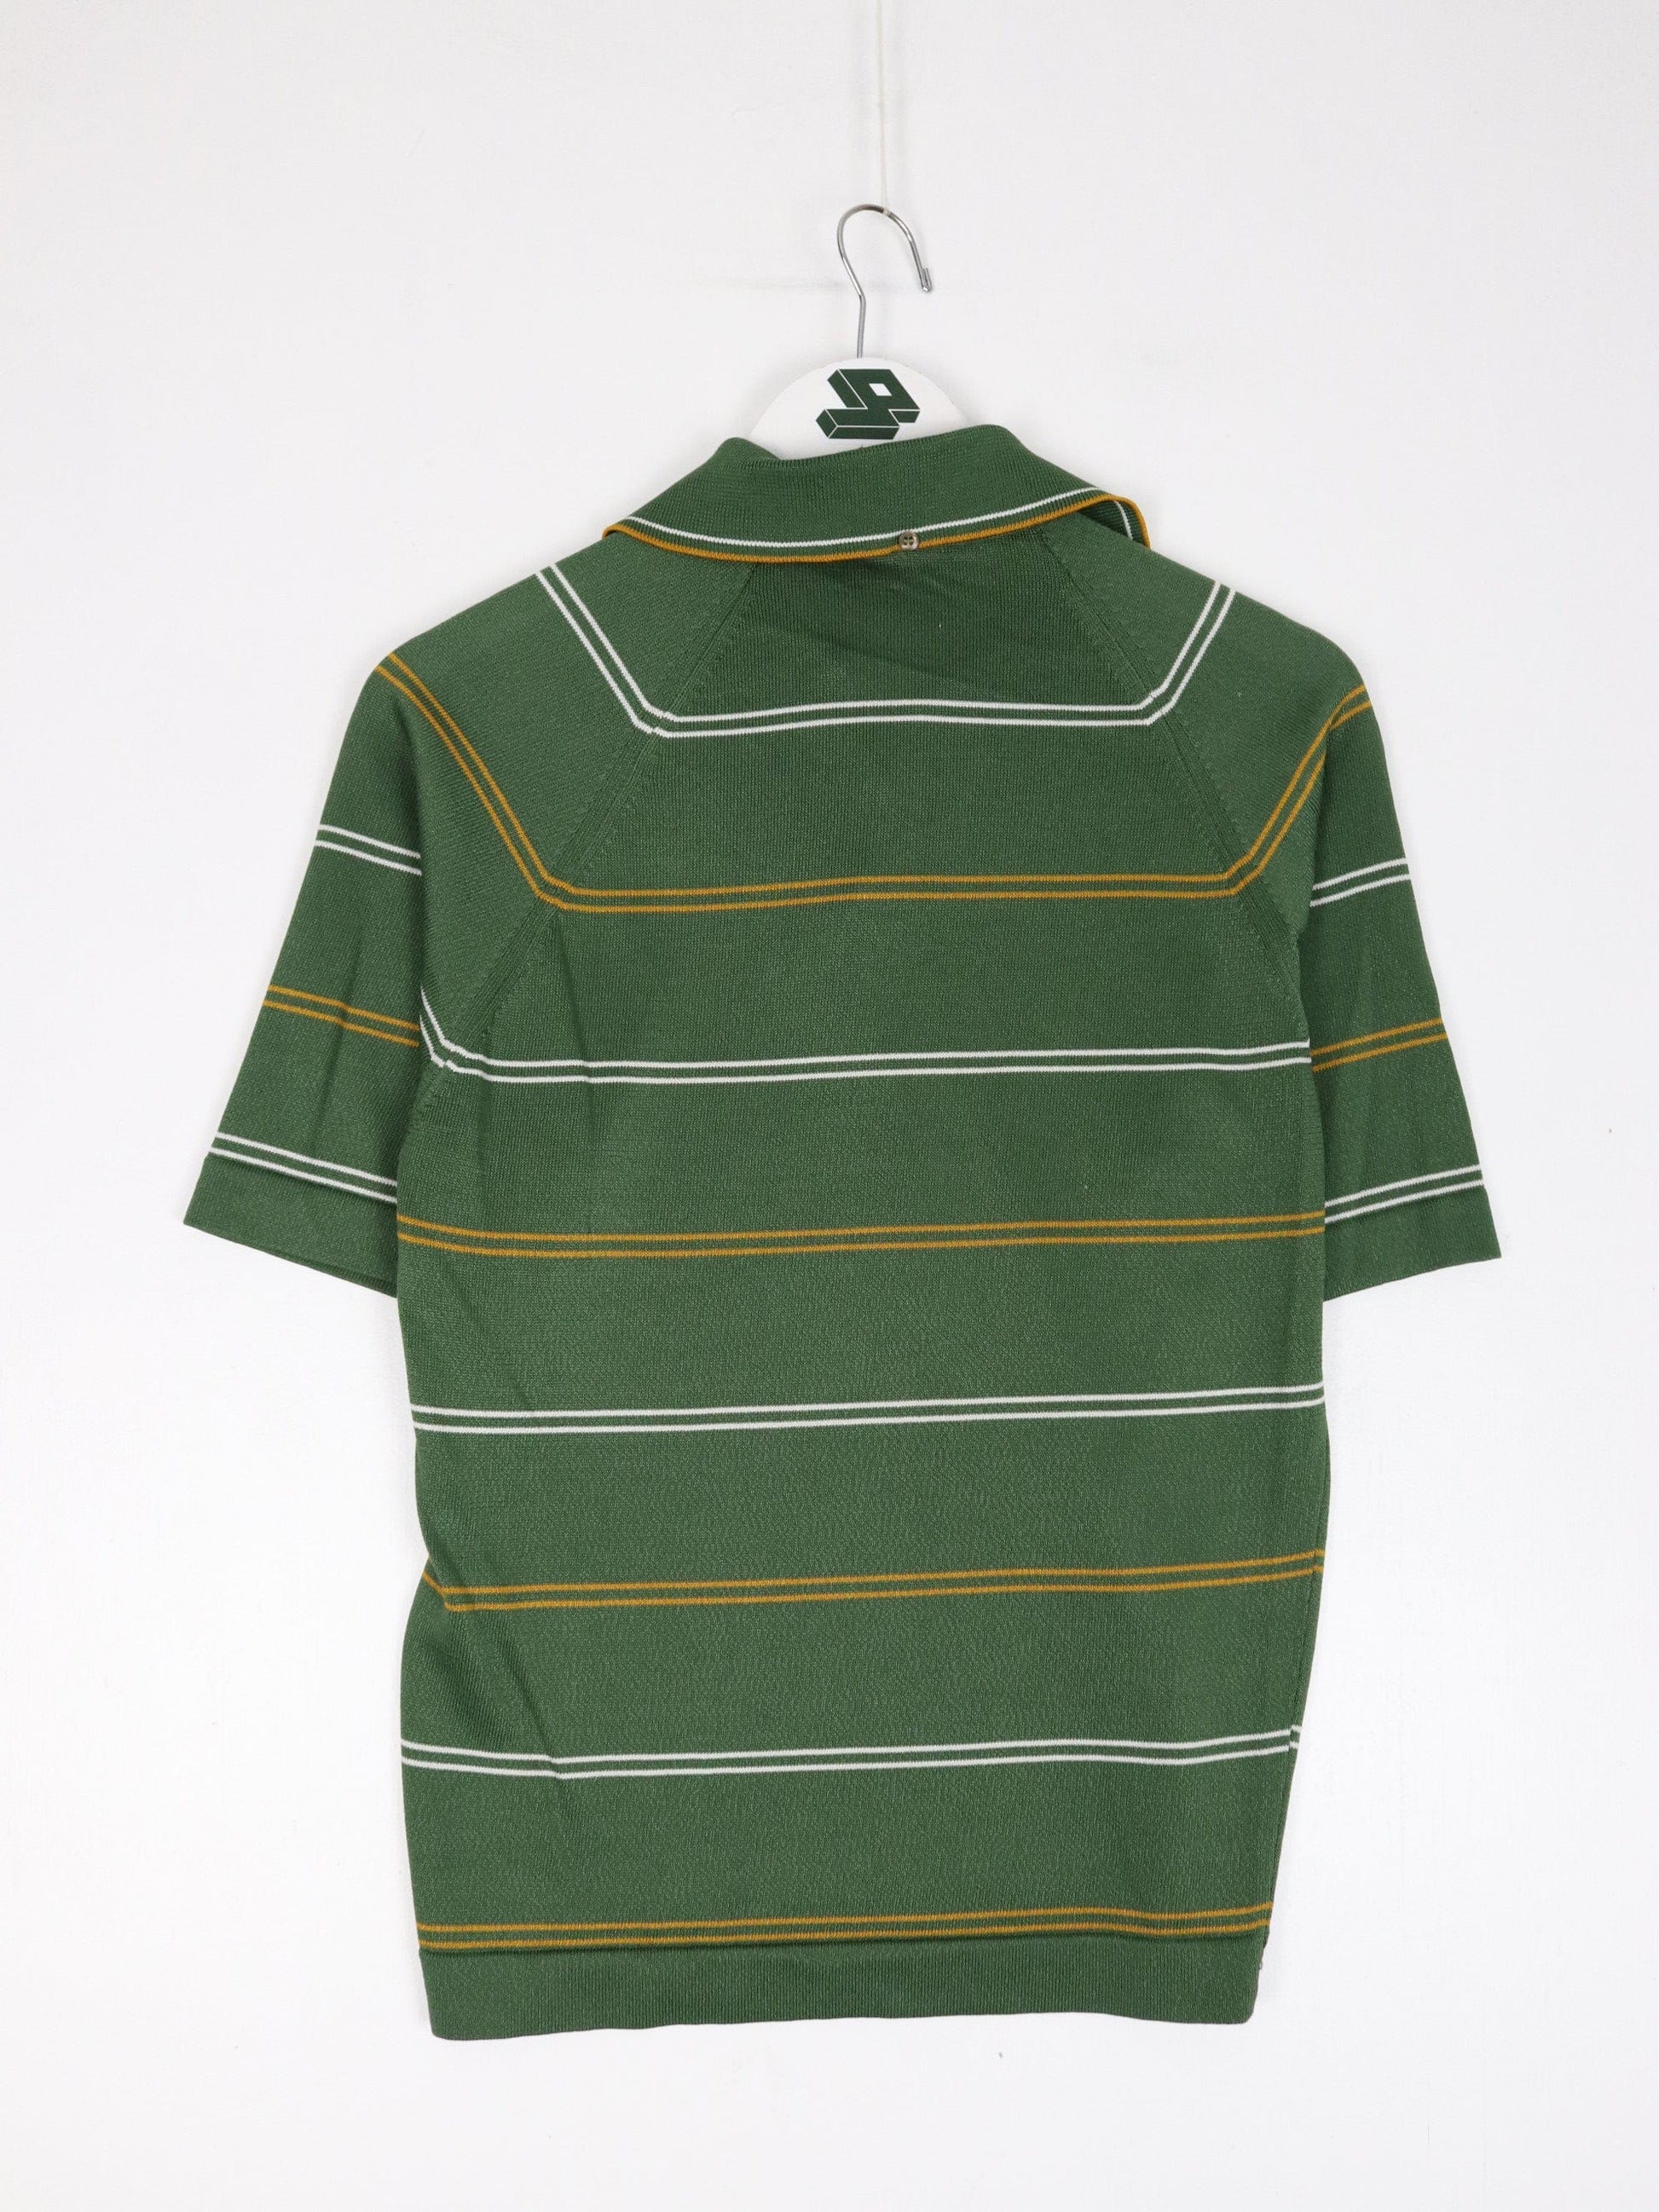 Other Button Up Shirts Vintage Polo Shirt Adult Small Green Striped Lightweight